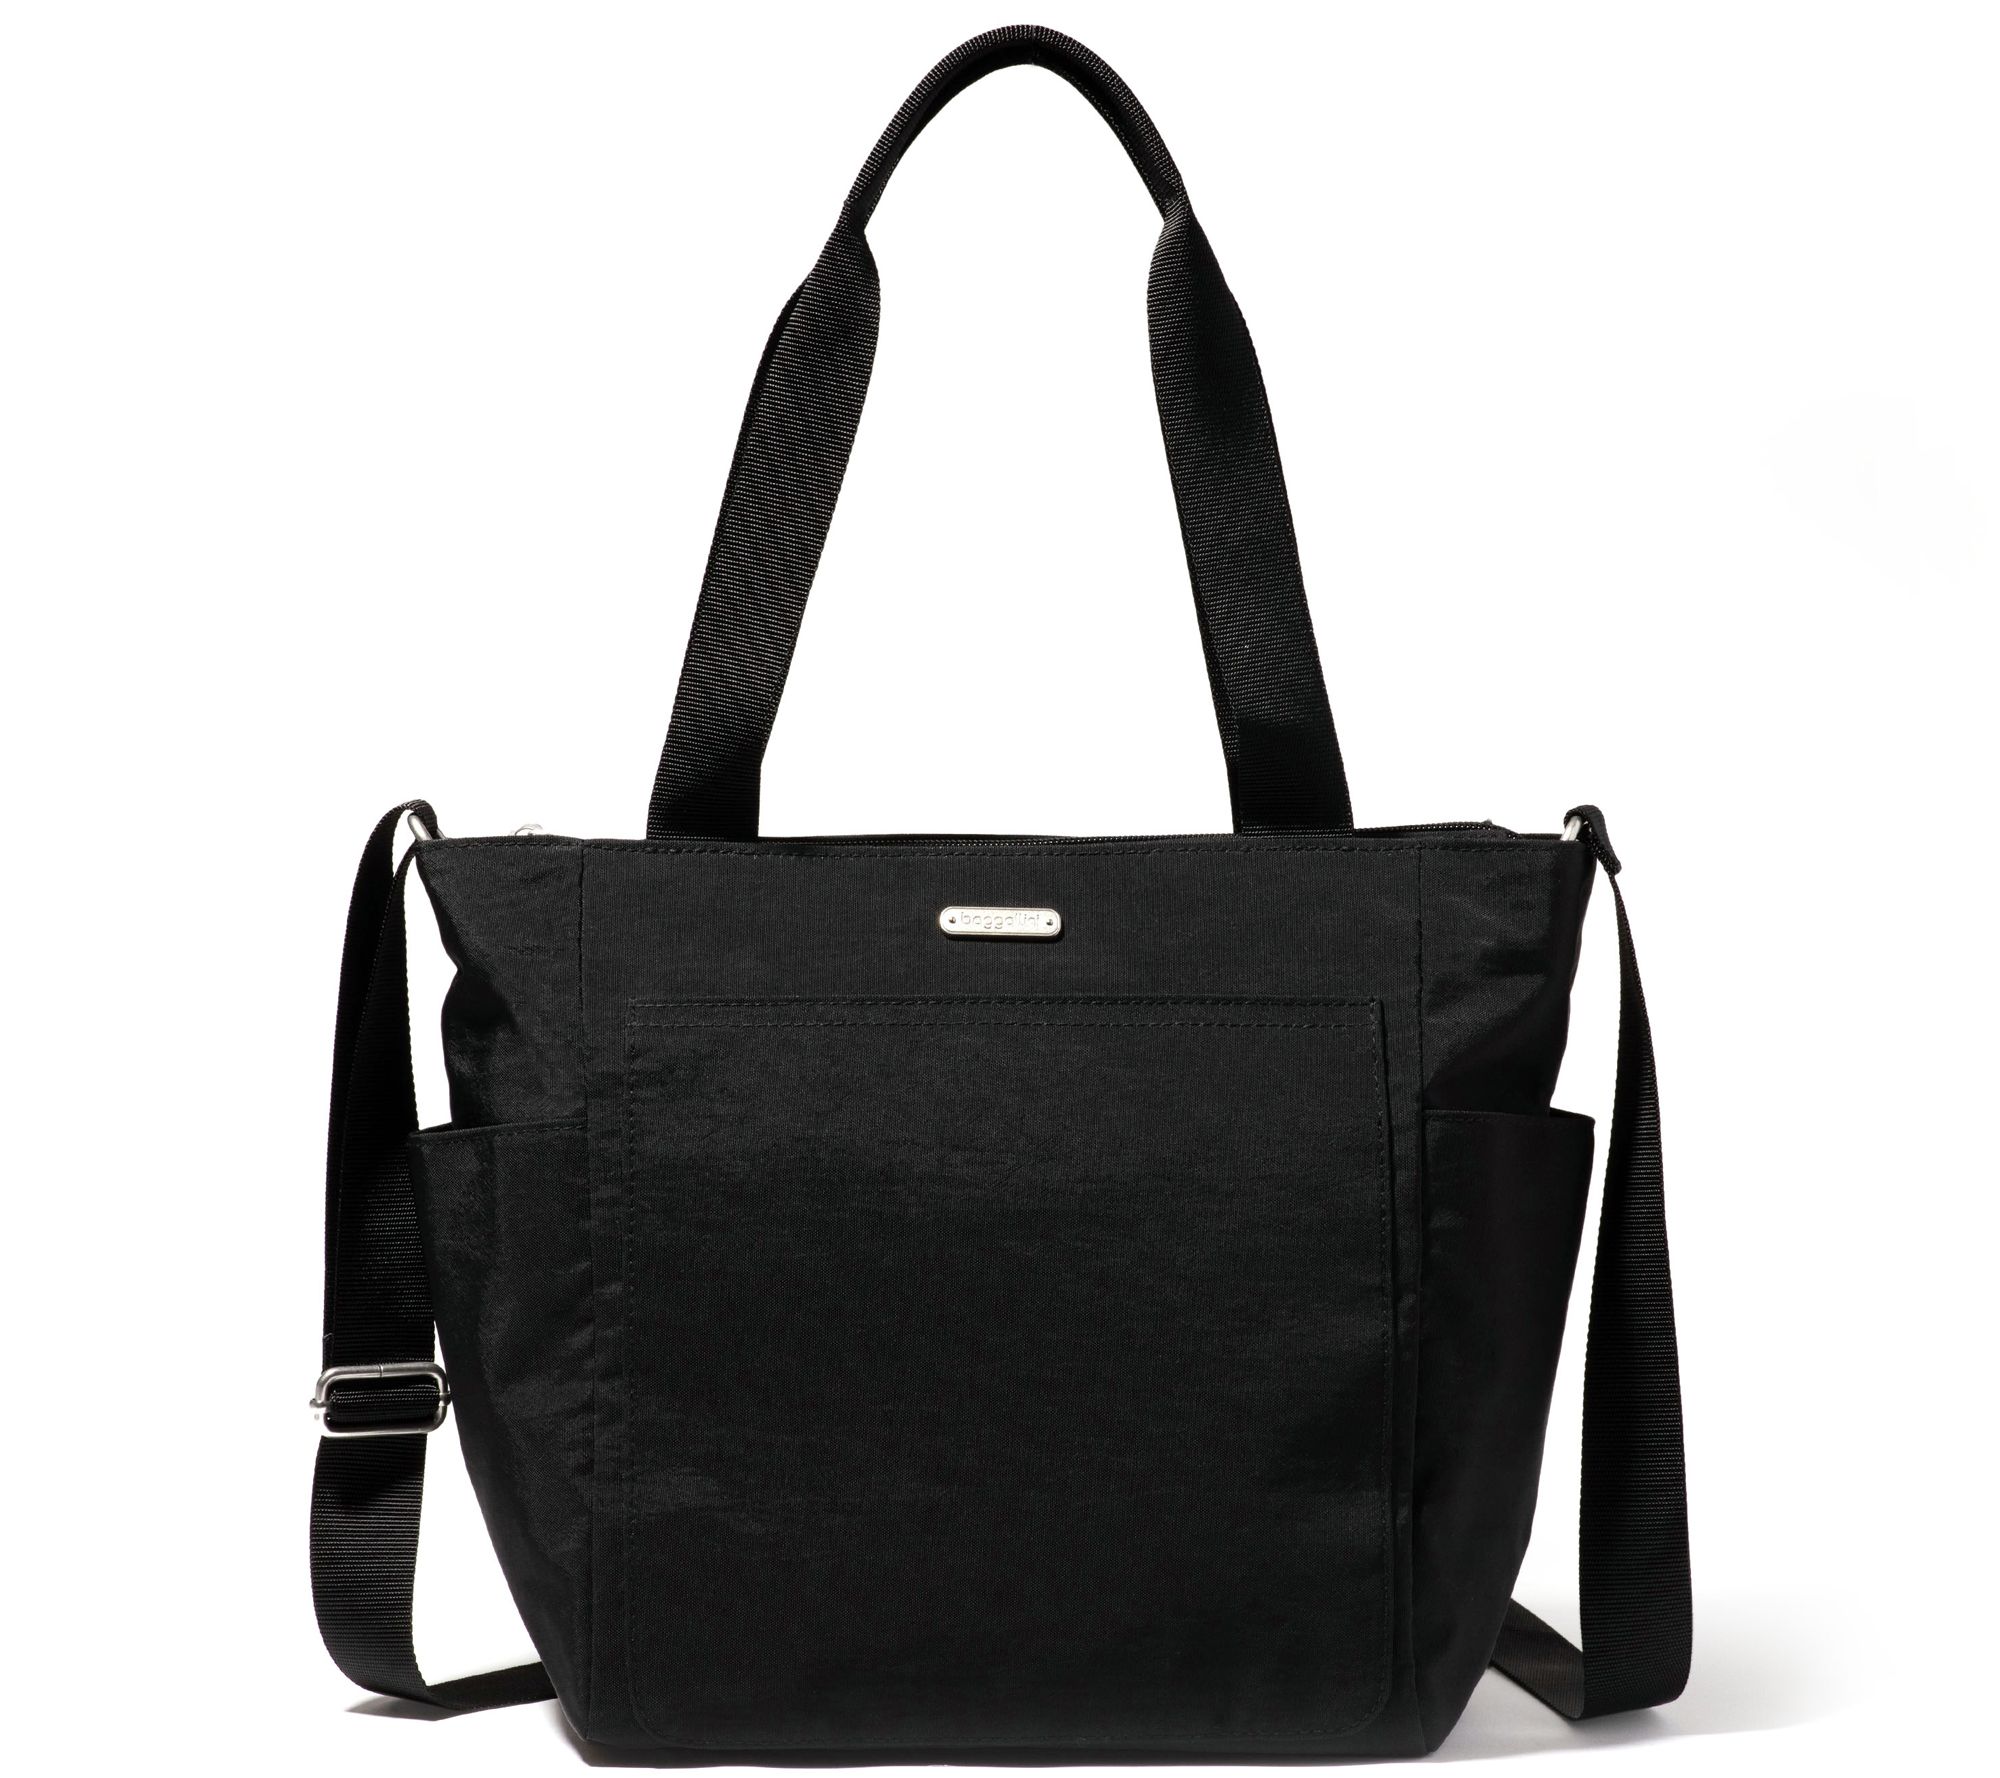 Tote Bags  Leather Tote Bags, Work Tote Bags & More 